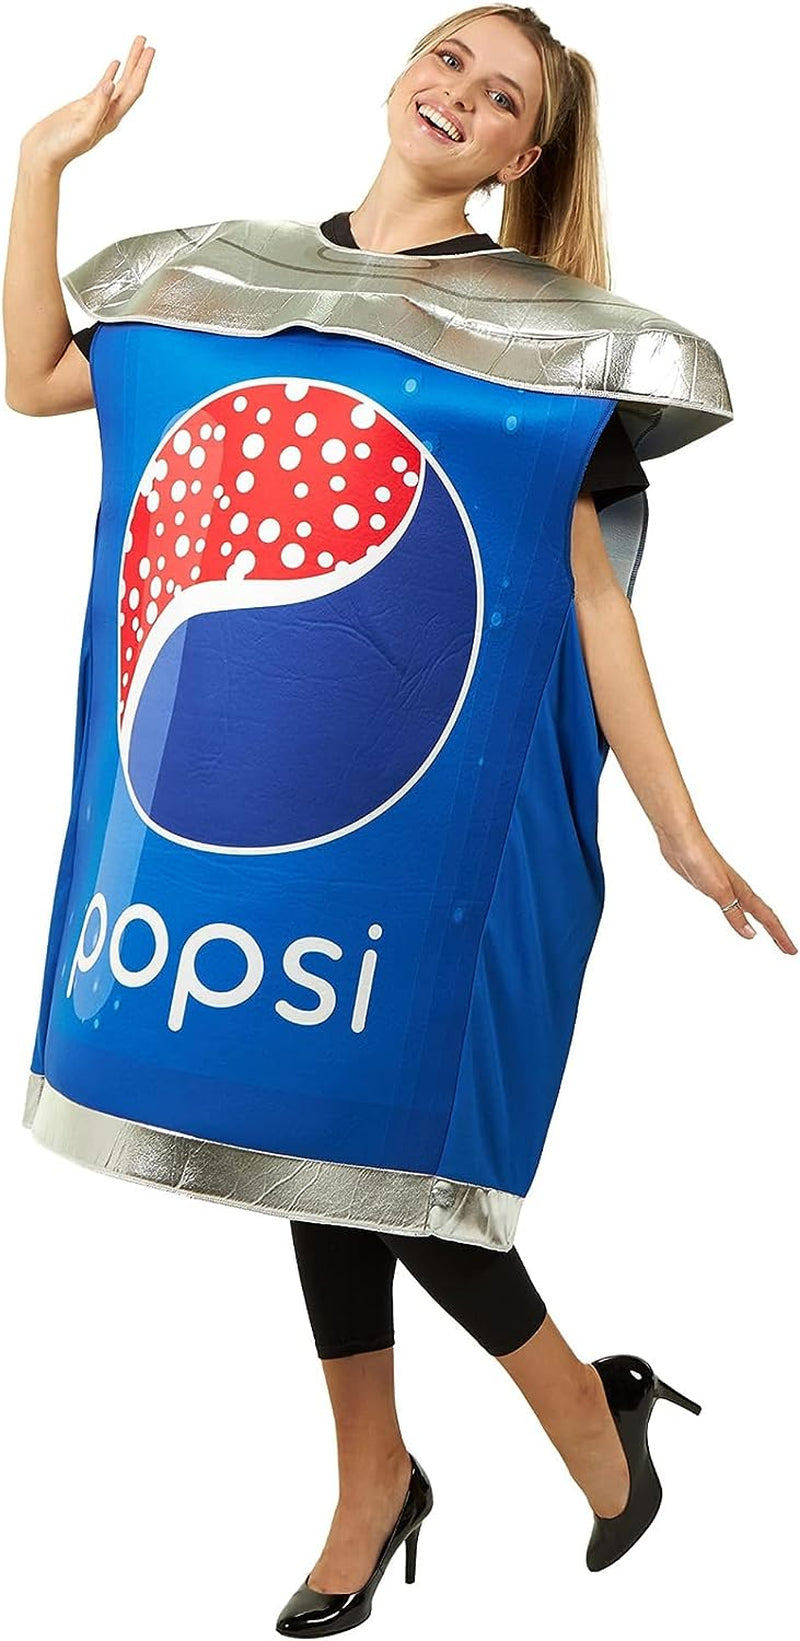 Beverage Can Costume | Slip on Halloween Costume for Women and Men| One Size Fits All  Hauntlook Blue Cola Can Costume  